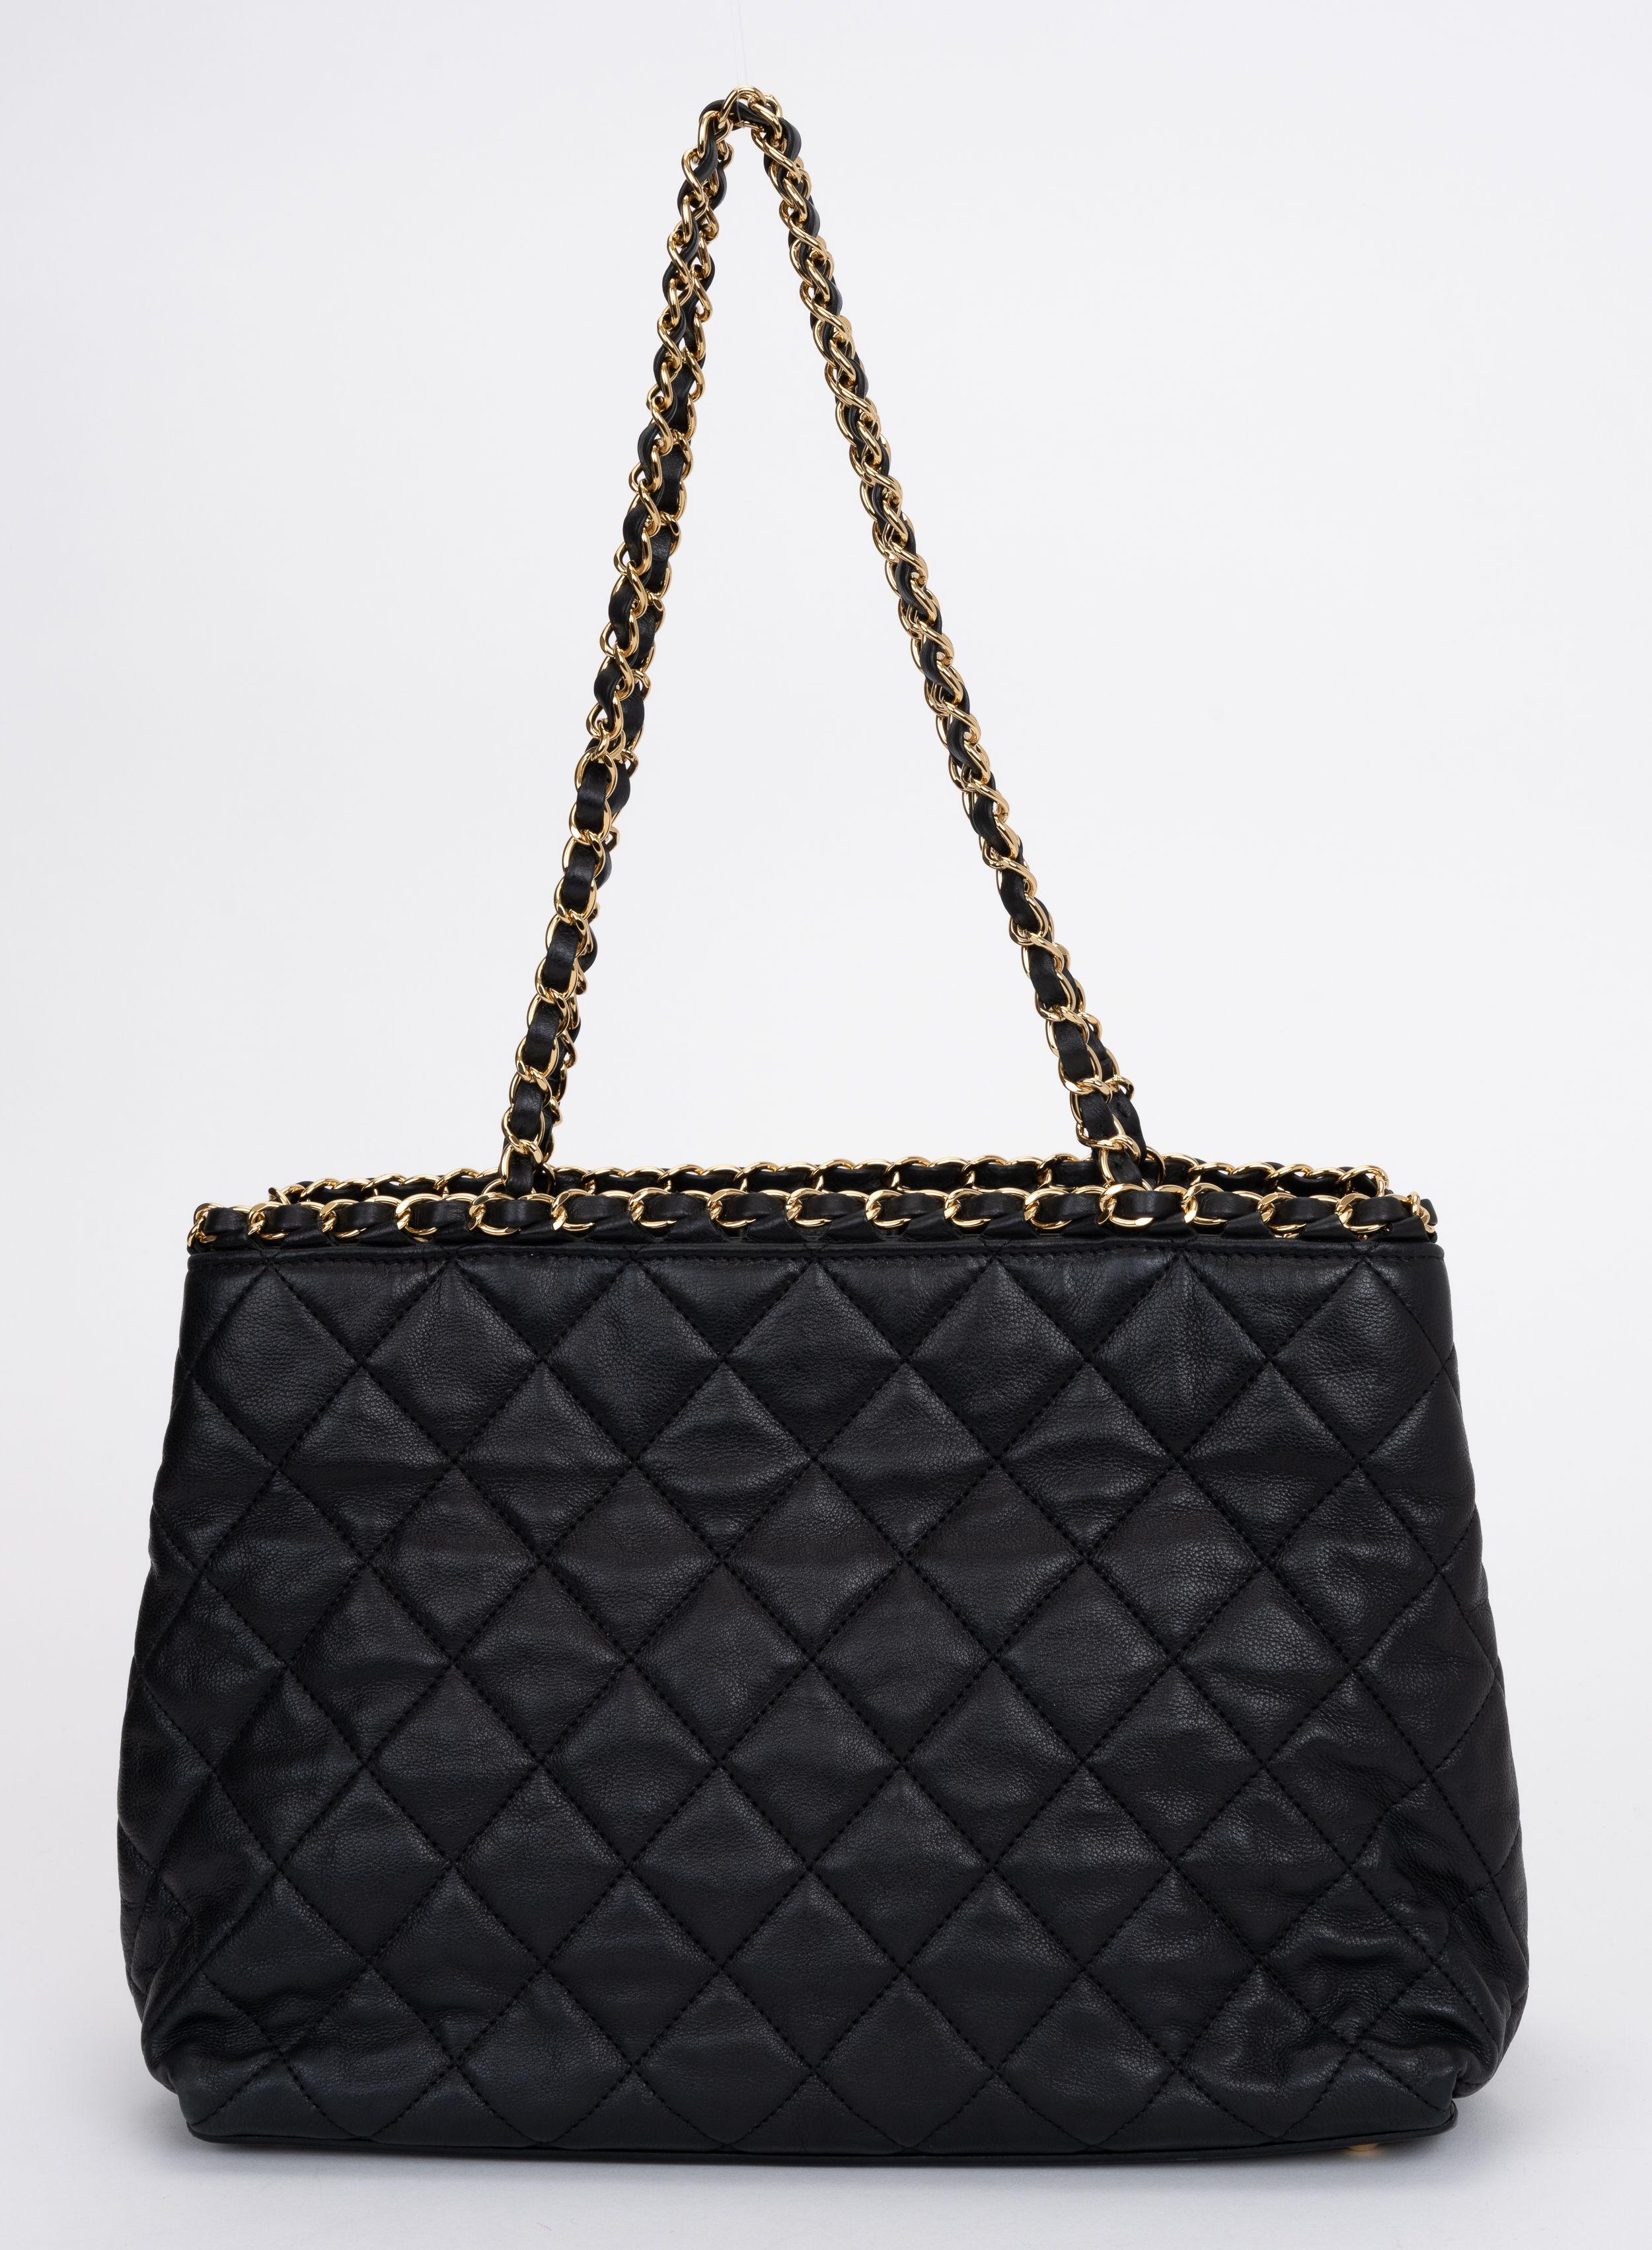 Women's Chanel Black Quilted Gold Chain Me Tote For Sale